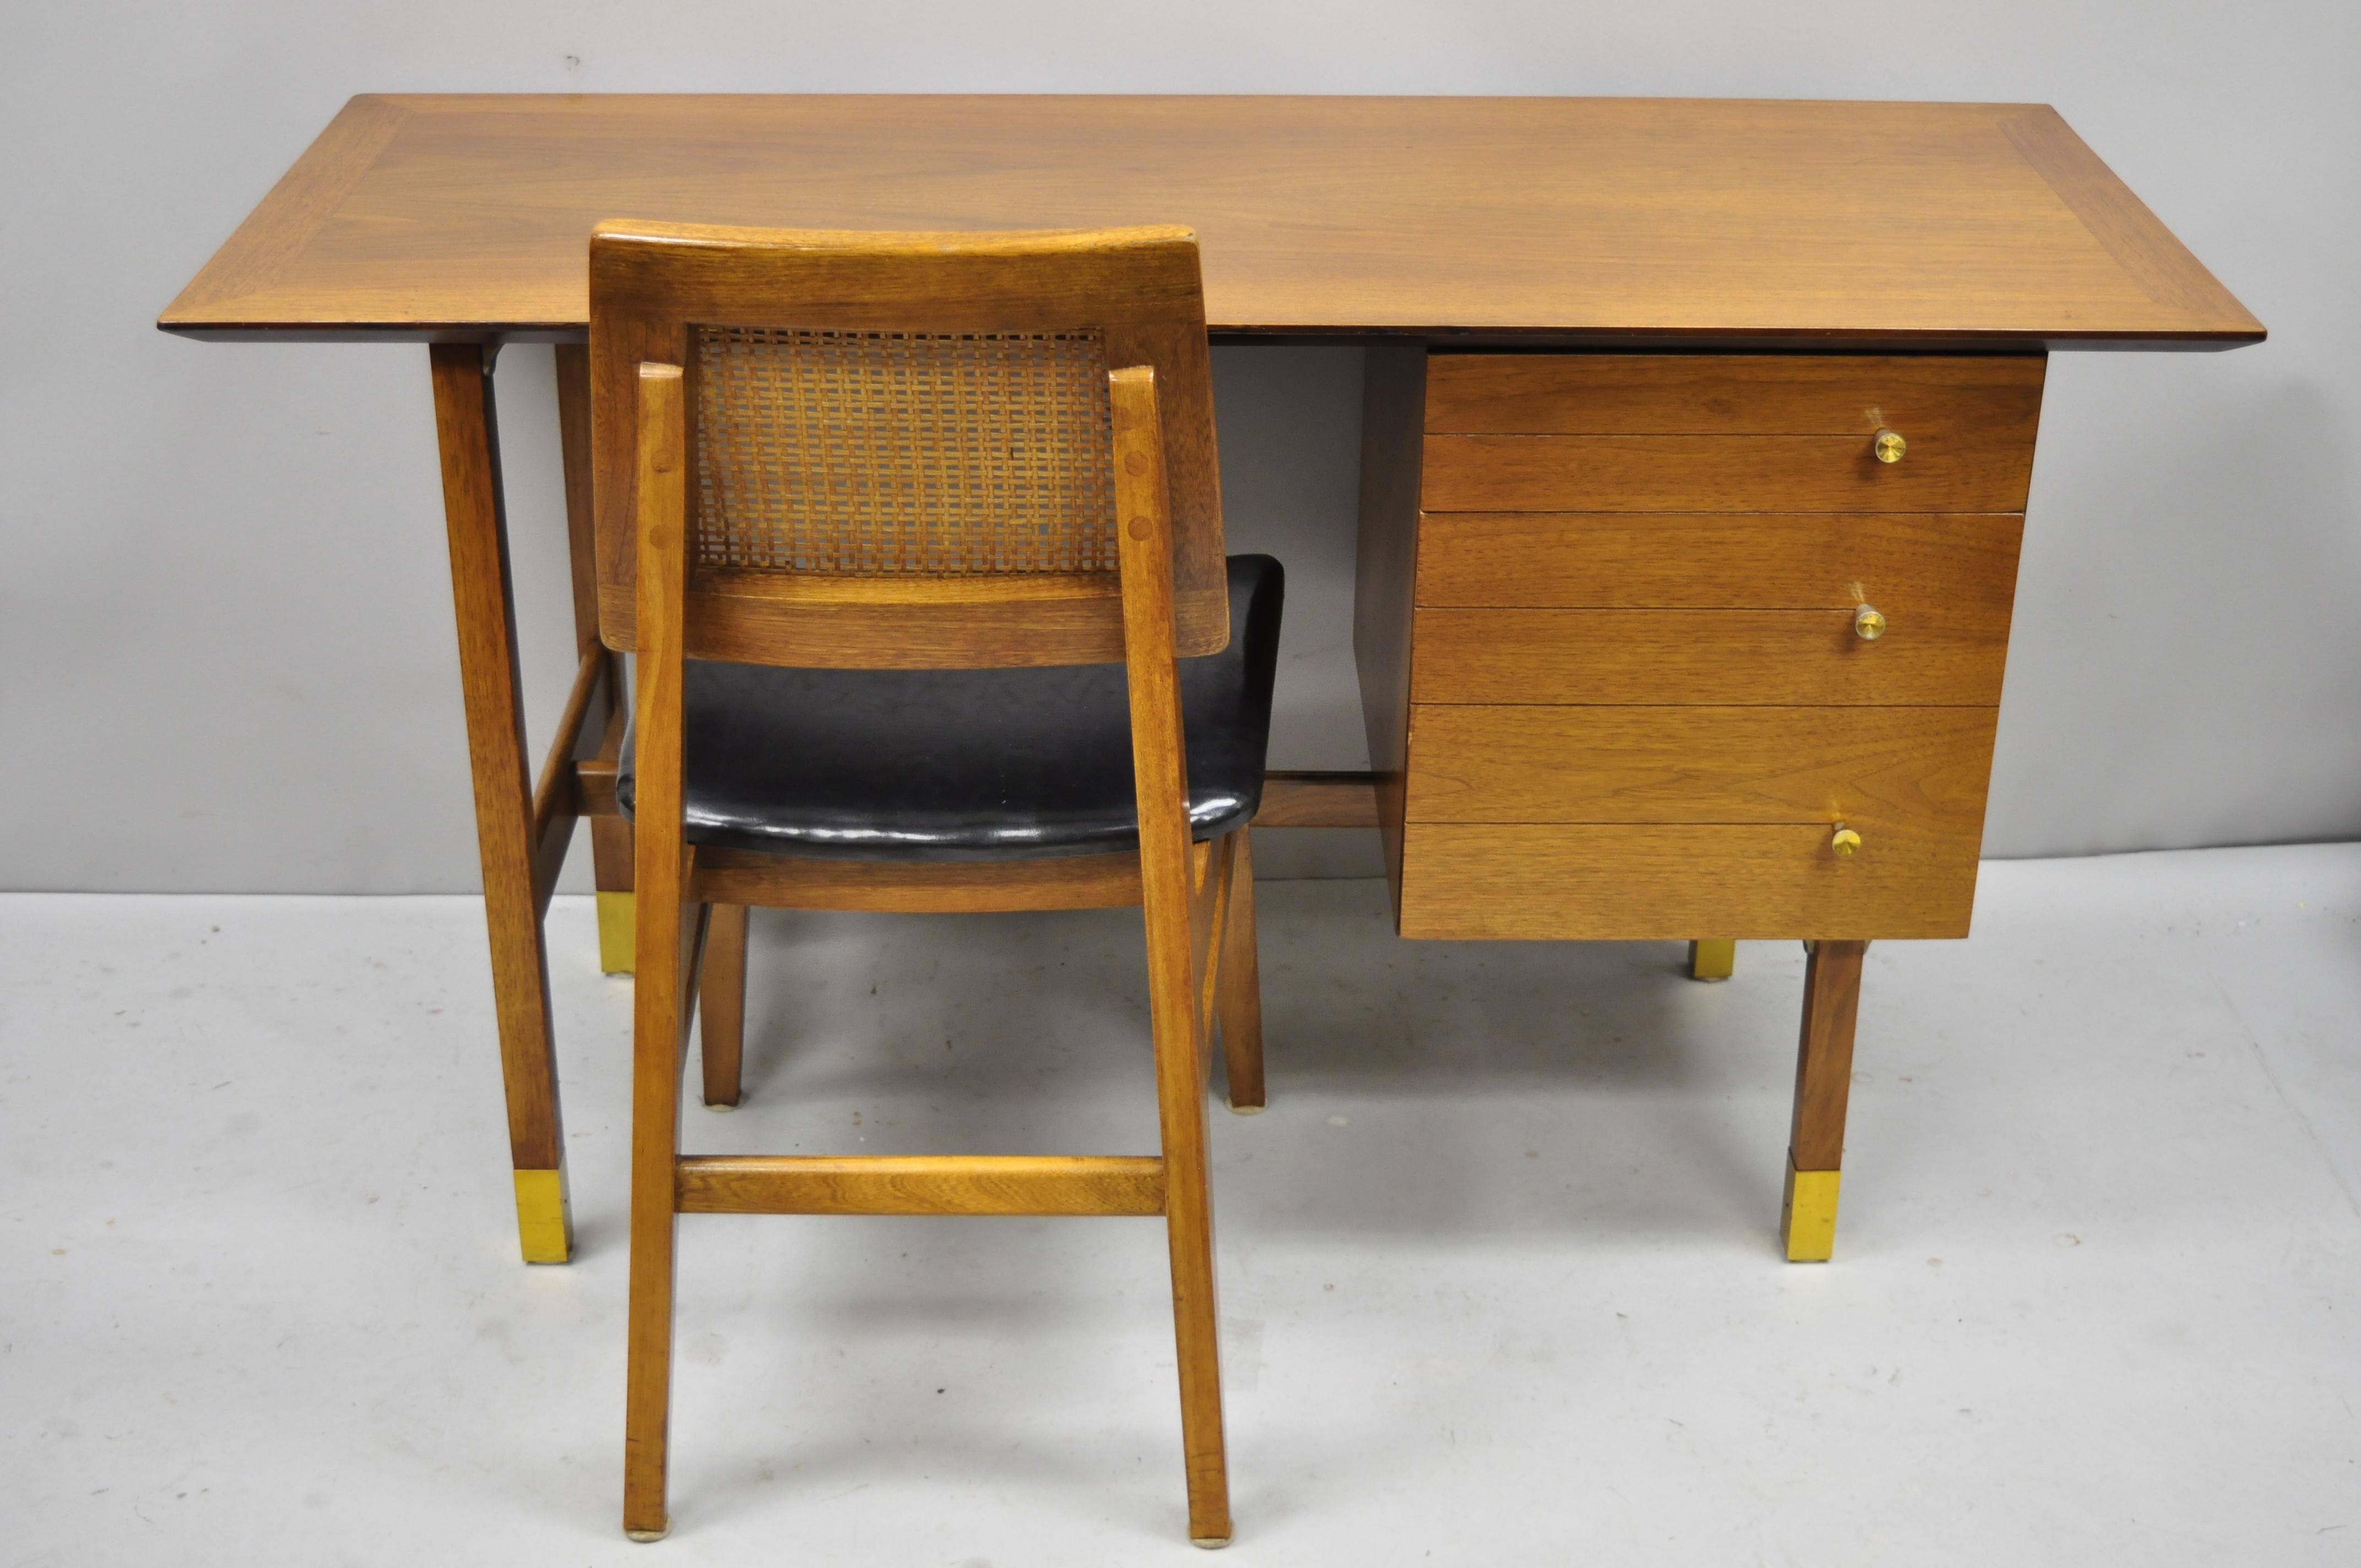 Mid-Century Modern walnut floating top writing desk and cane Hibriten desk chair. Item features floating form writing desk with brass feet, sleek vintage desk chair with cane back, (Hibriten chair Co.) label to chair, beautiful wood grain, finished